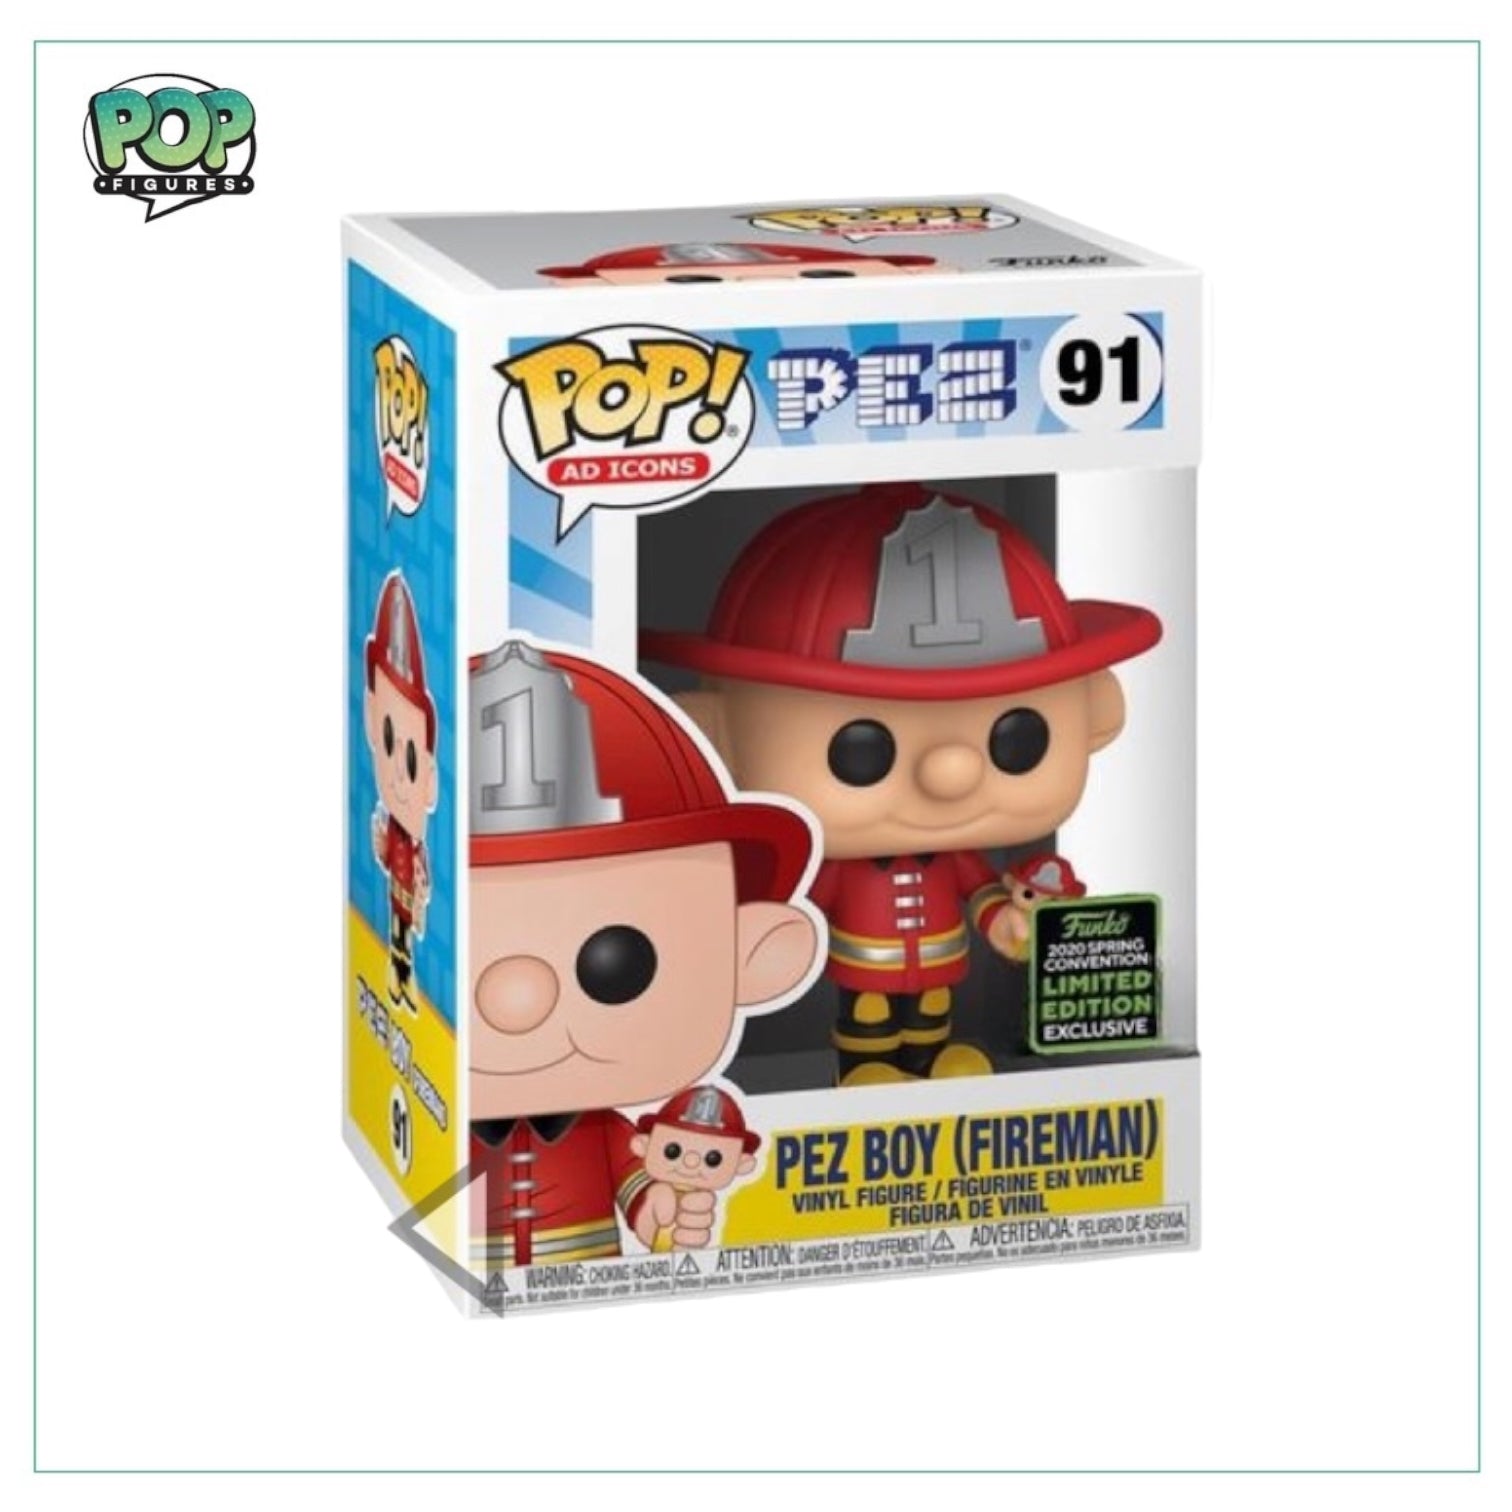 Pez Boy (Fireman) #91 Funko Pop! - Ad Icons-  2020 ECCC Shared Convention